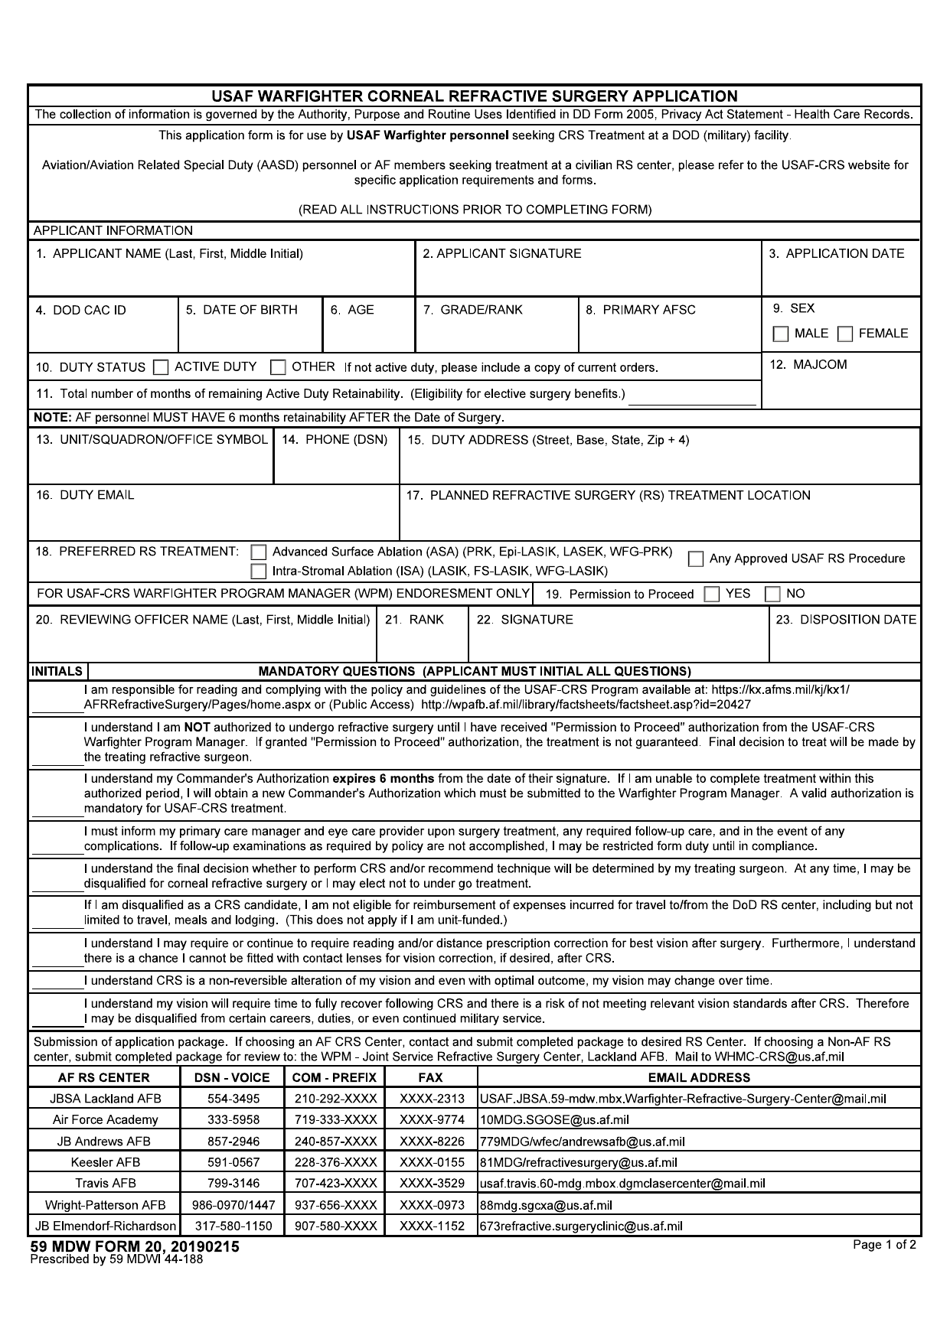 59 MDW Form 20 USAF Warfighter Corneal Refractive Surgery Application, Page 1